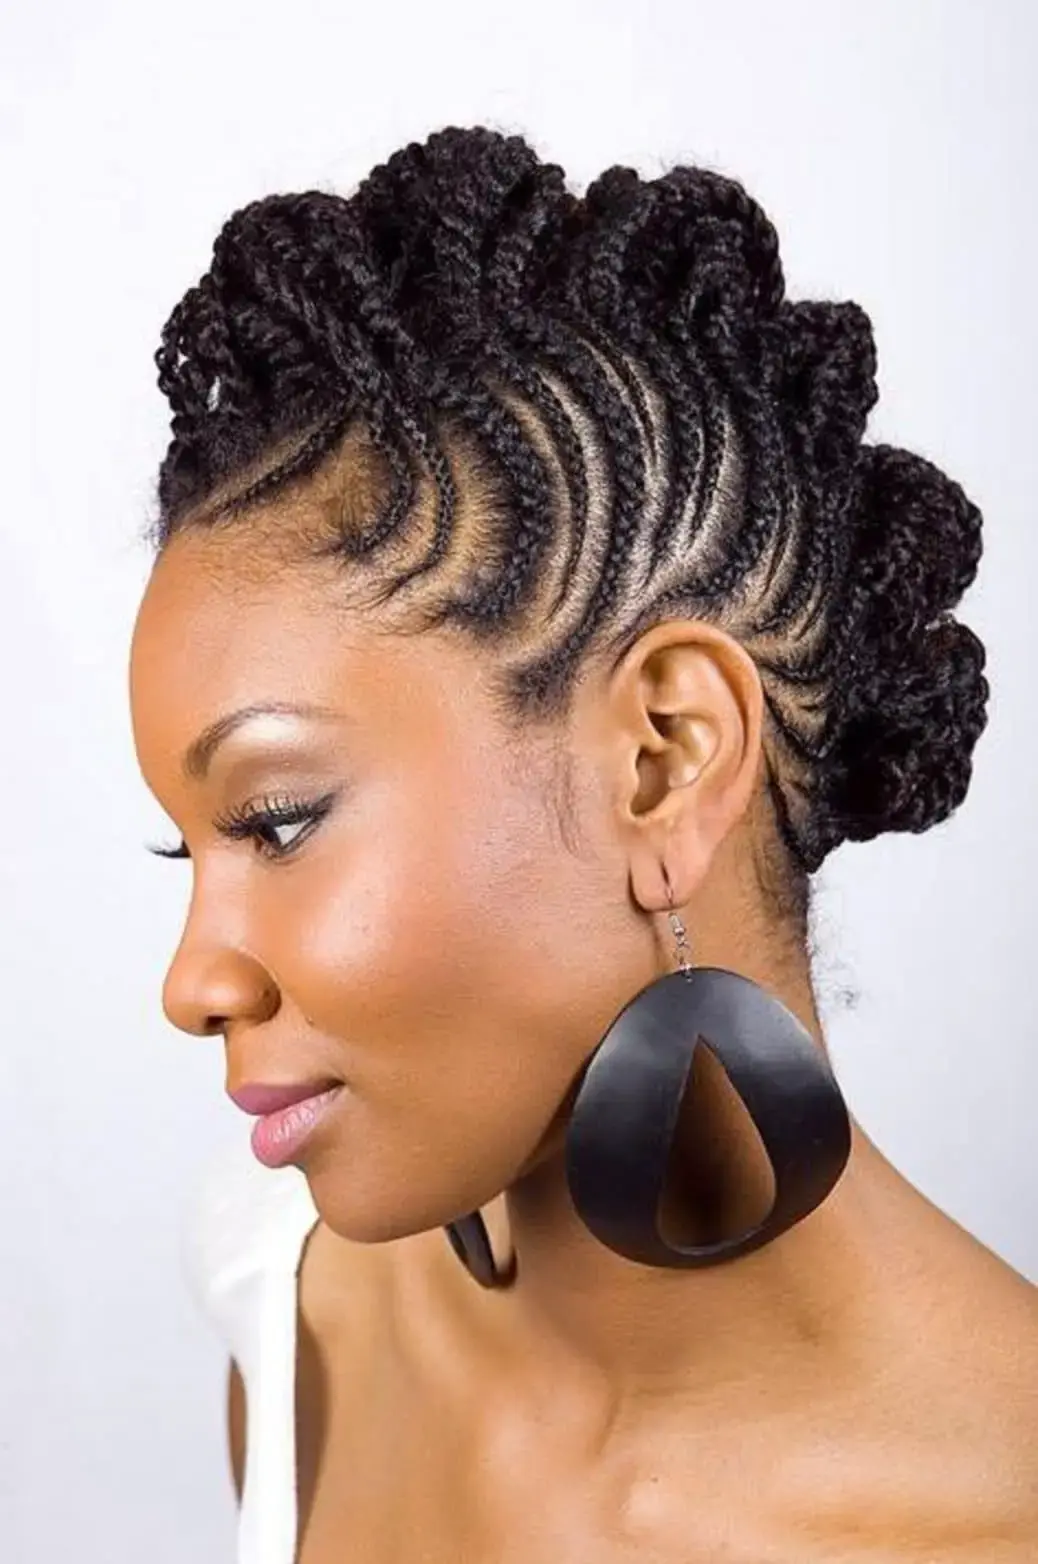 Beautiful Latest Hairstyles for Ladies in Kenya 2021, Latest Abuja Lines  Styles 2021, Mwongezo Styles in Kenya, Latest Hairstyles for Ladies in Kenya  2020 & Abuja Hairstyles in Nairobi • Chick About Town | Flipboard